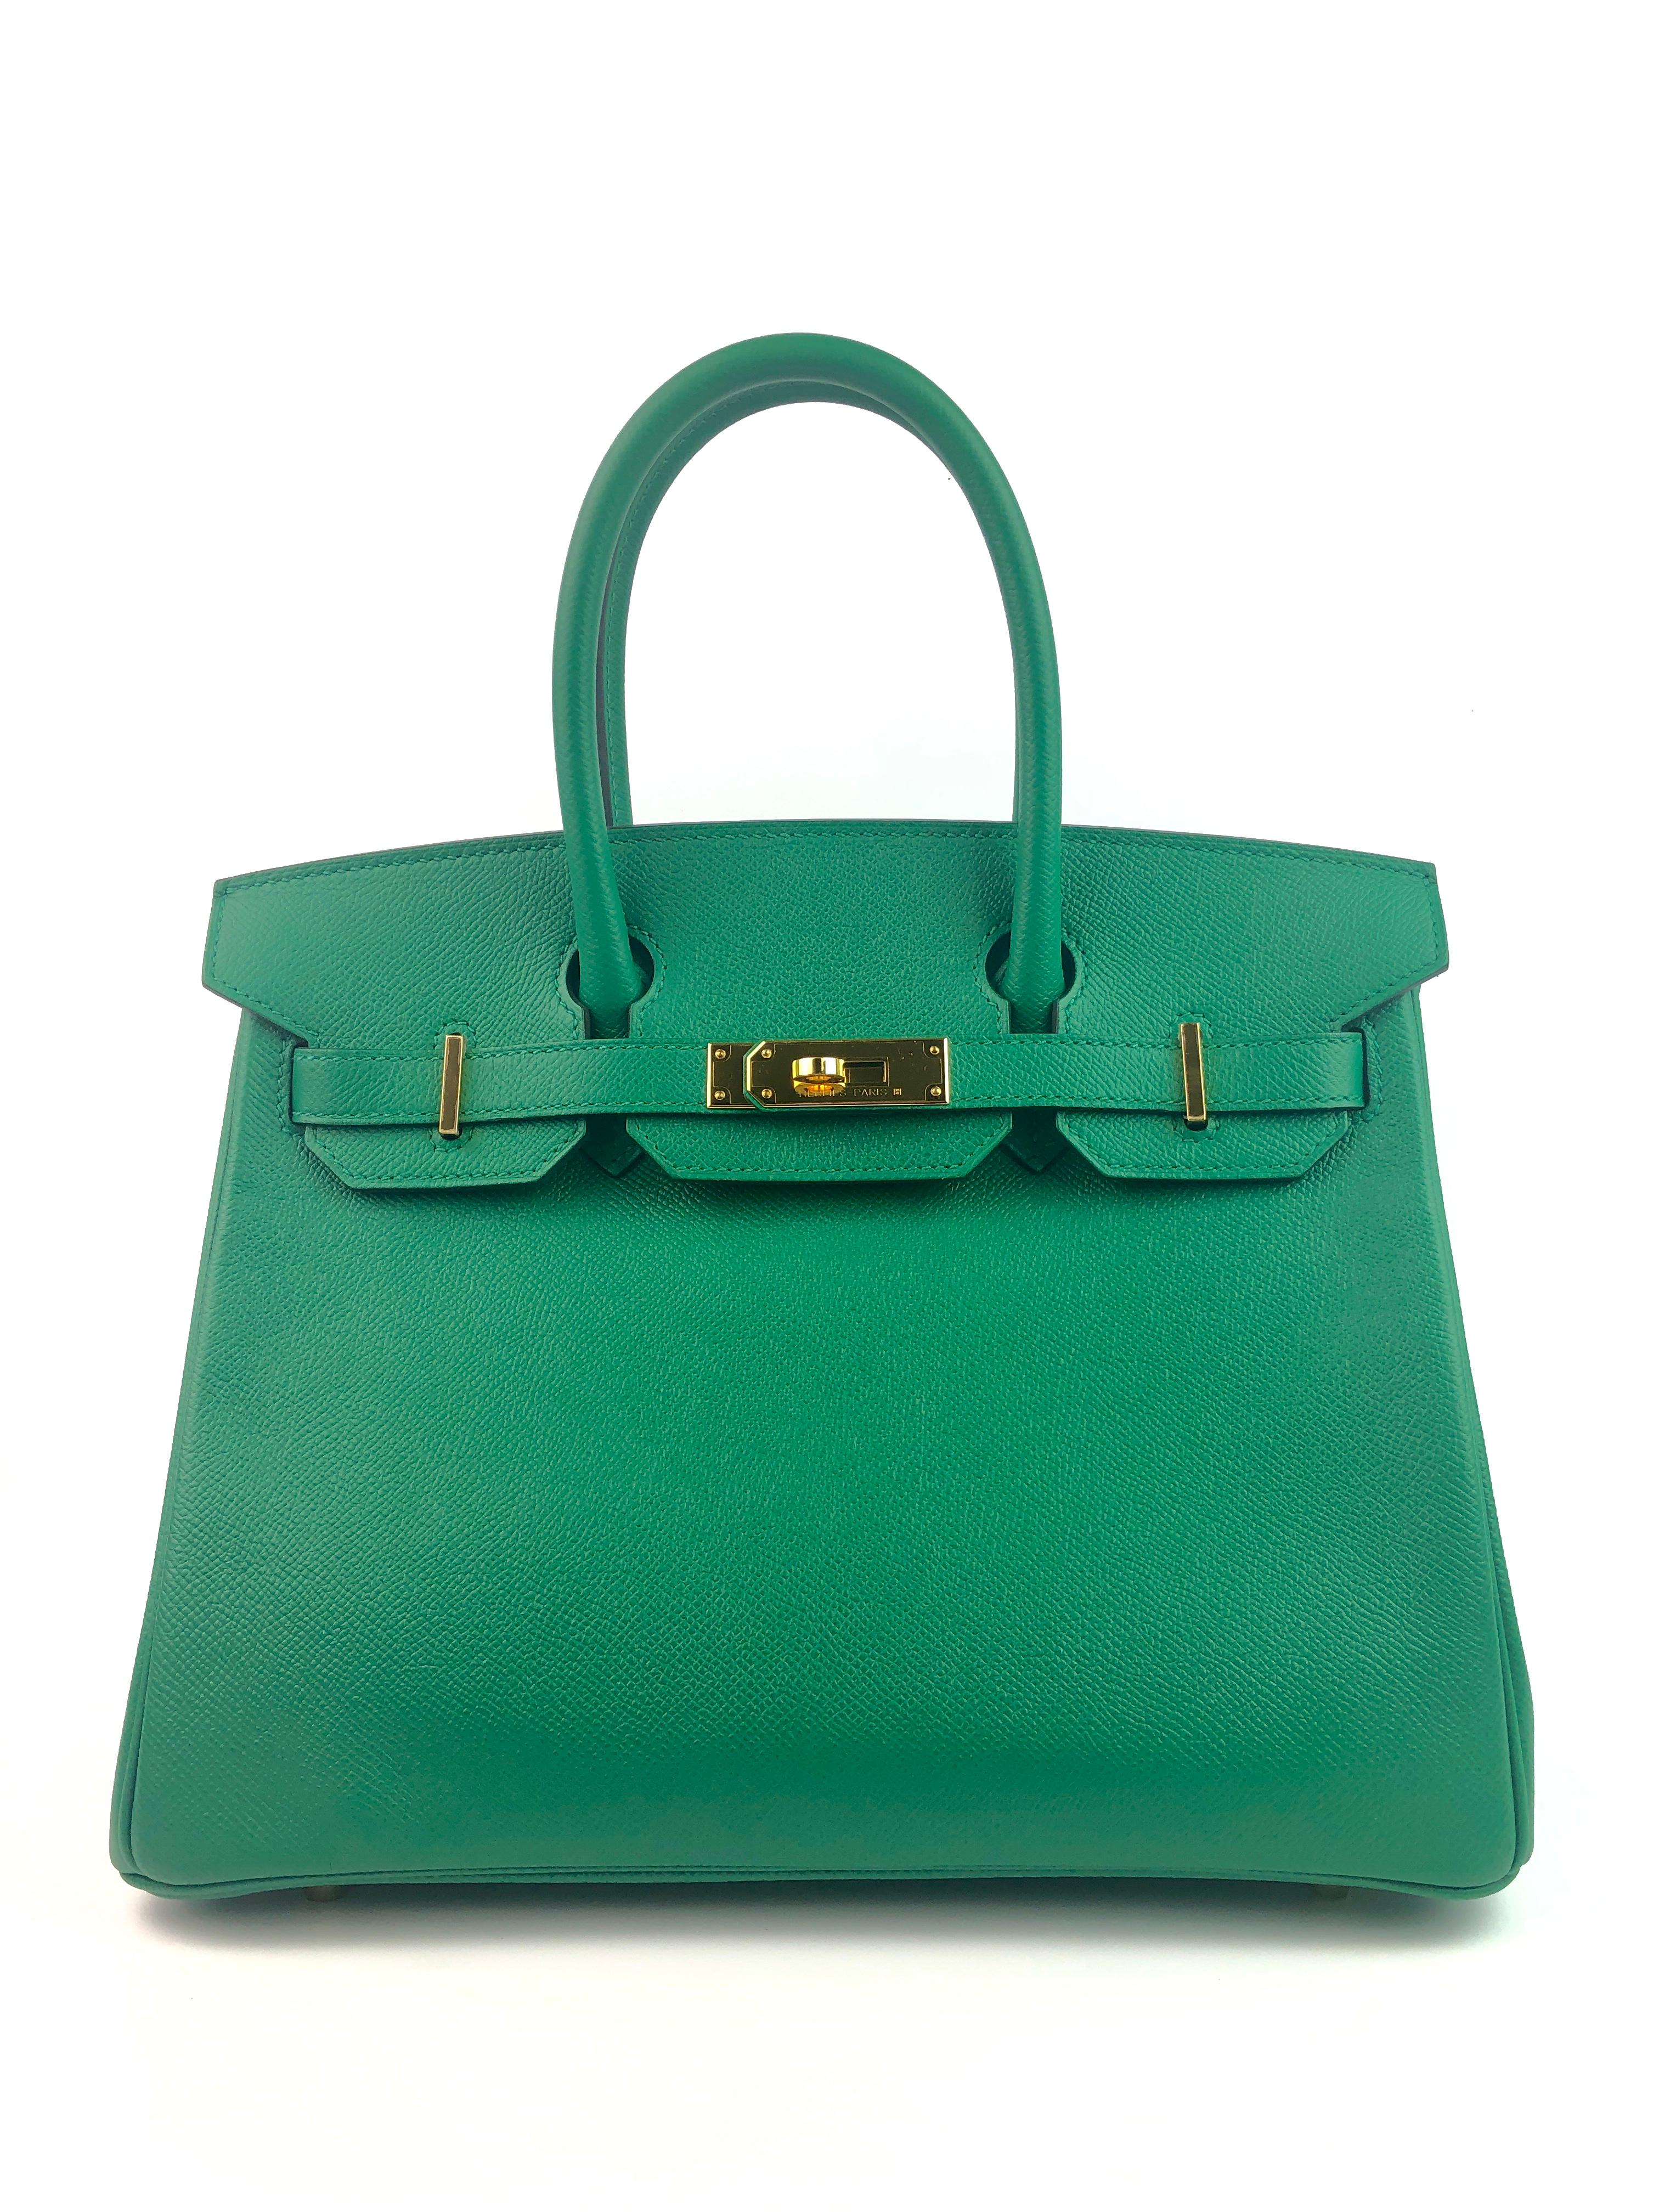 Hermes Birkin 30 Vert Vertigo Green Epsom Gold Hardware. 2018 C Stamp. Almost Like New Condition with All Plastic except on Feet. Includes copy of receipt. 

Shop with Confidence from Lux Addicts. Authenticity Guaranteed!